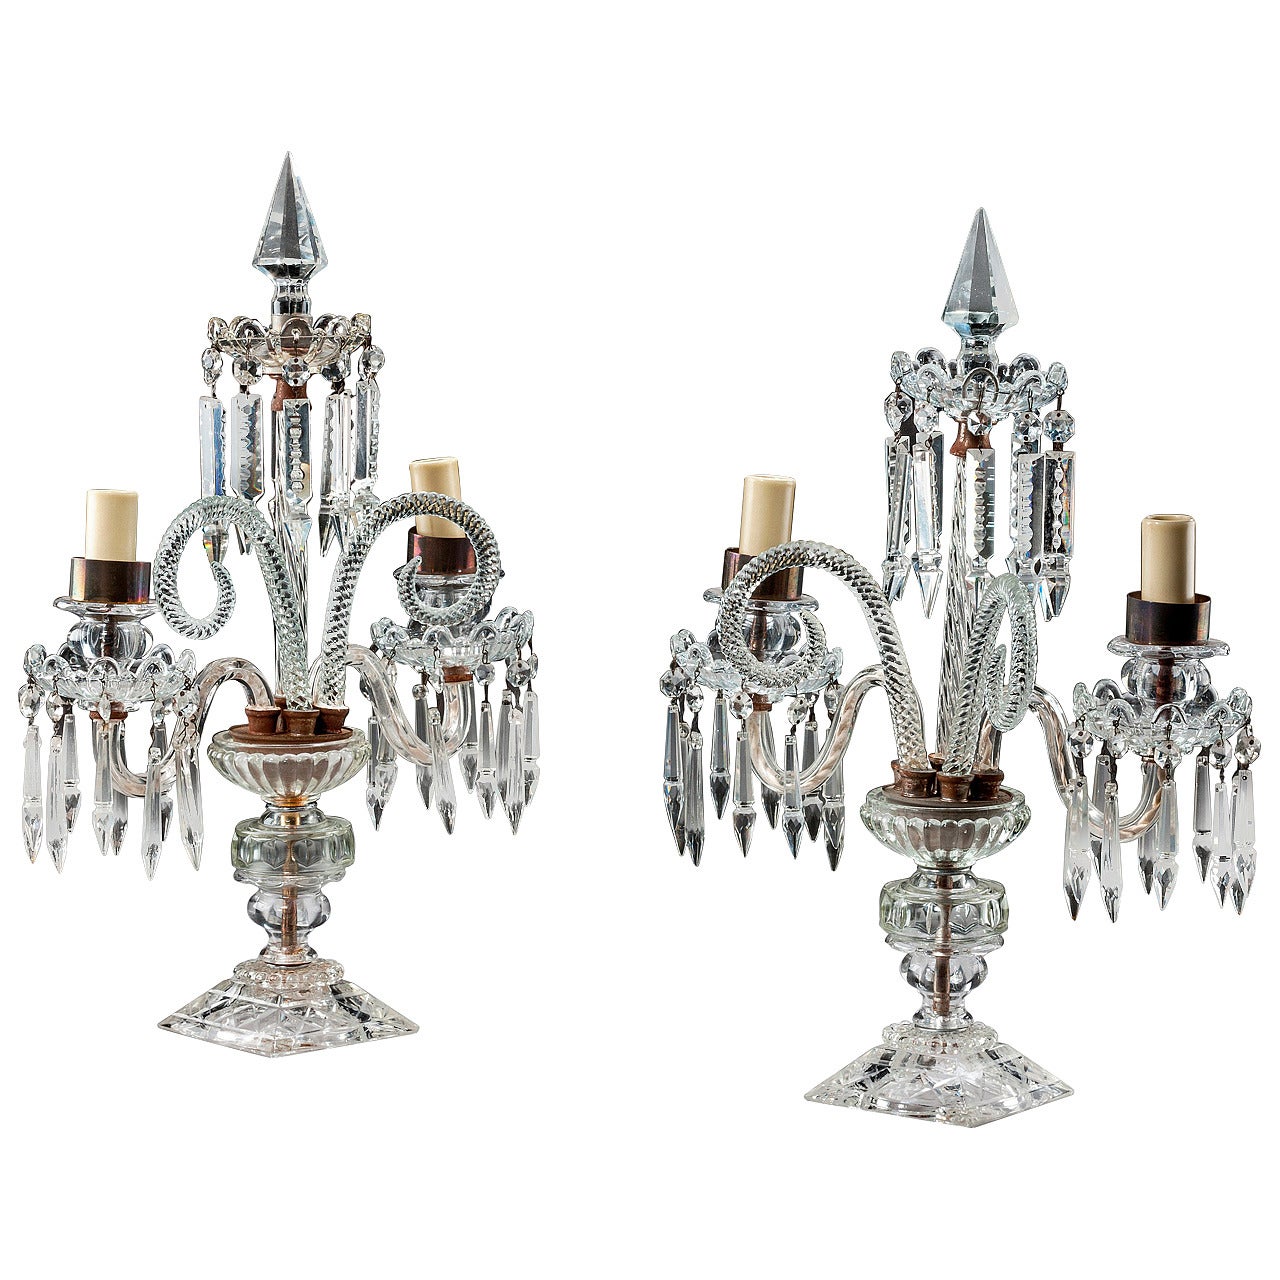 Pair of Cut Glass Candelabras